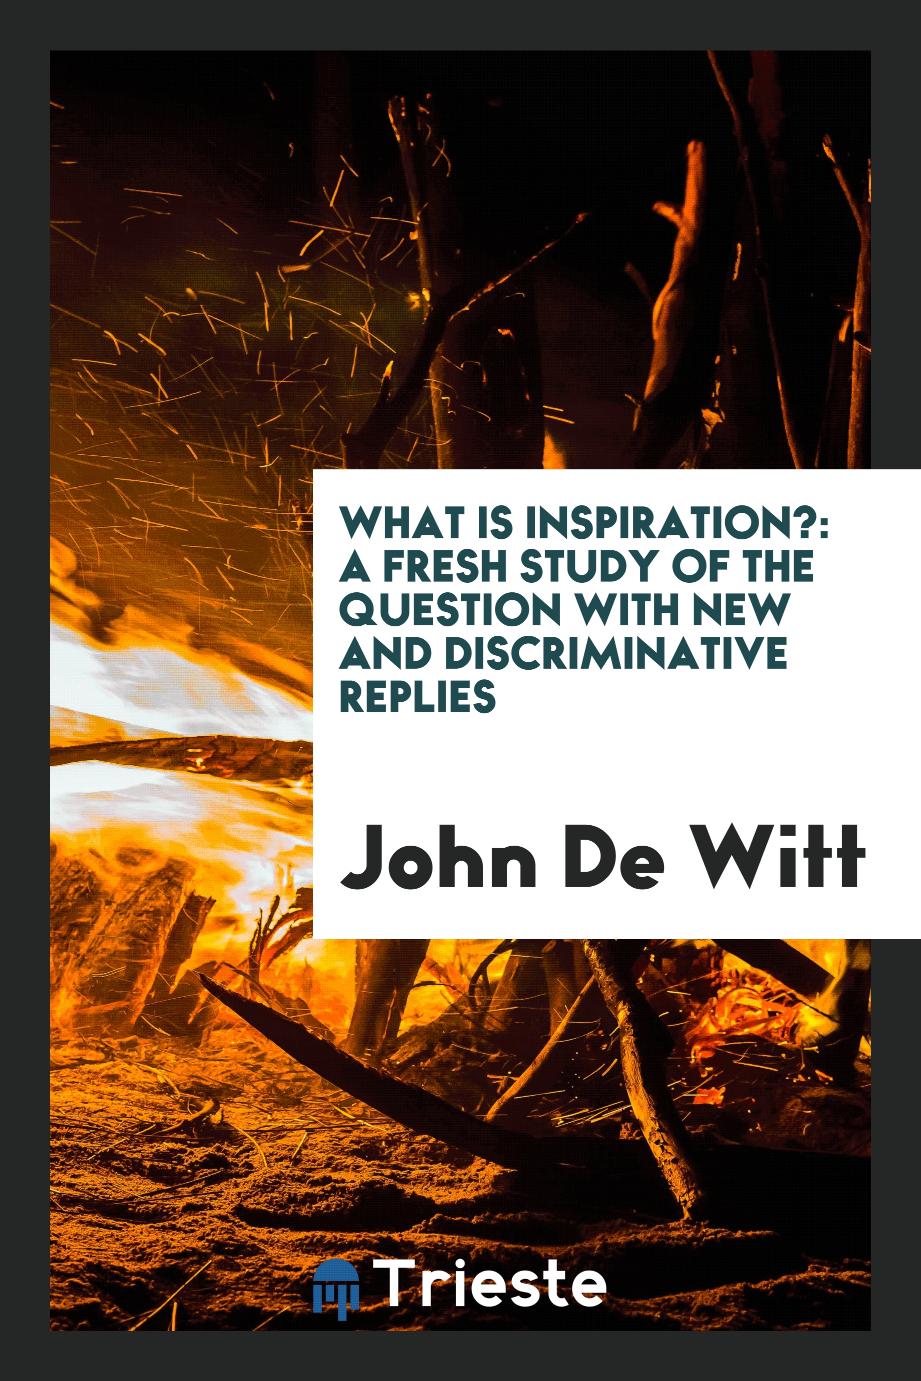 What is inspiration?: A fresh study of the question with new and discriminative replies